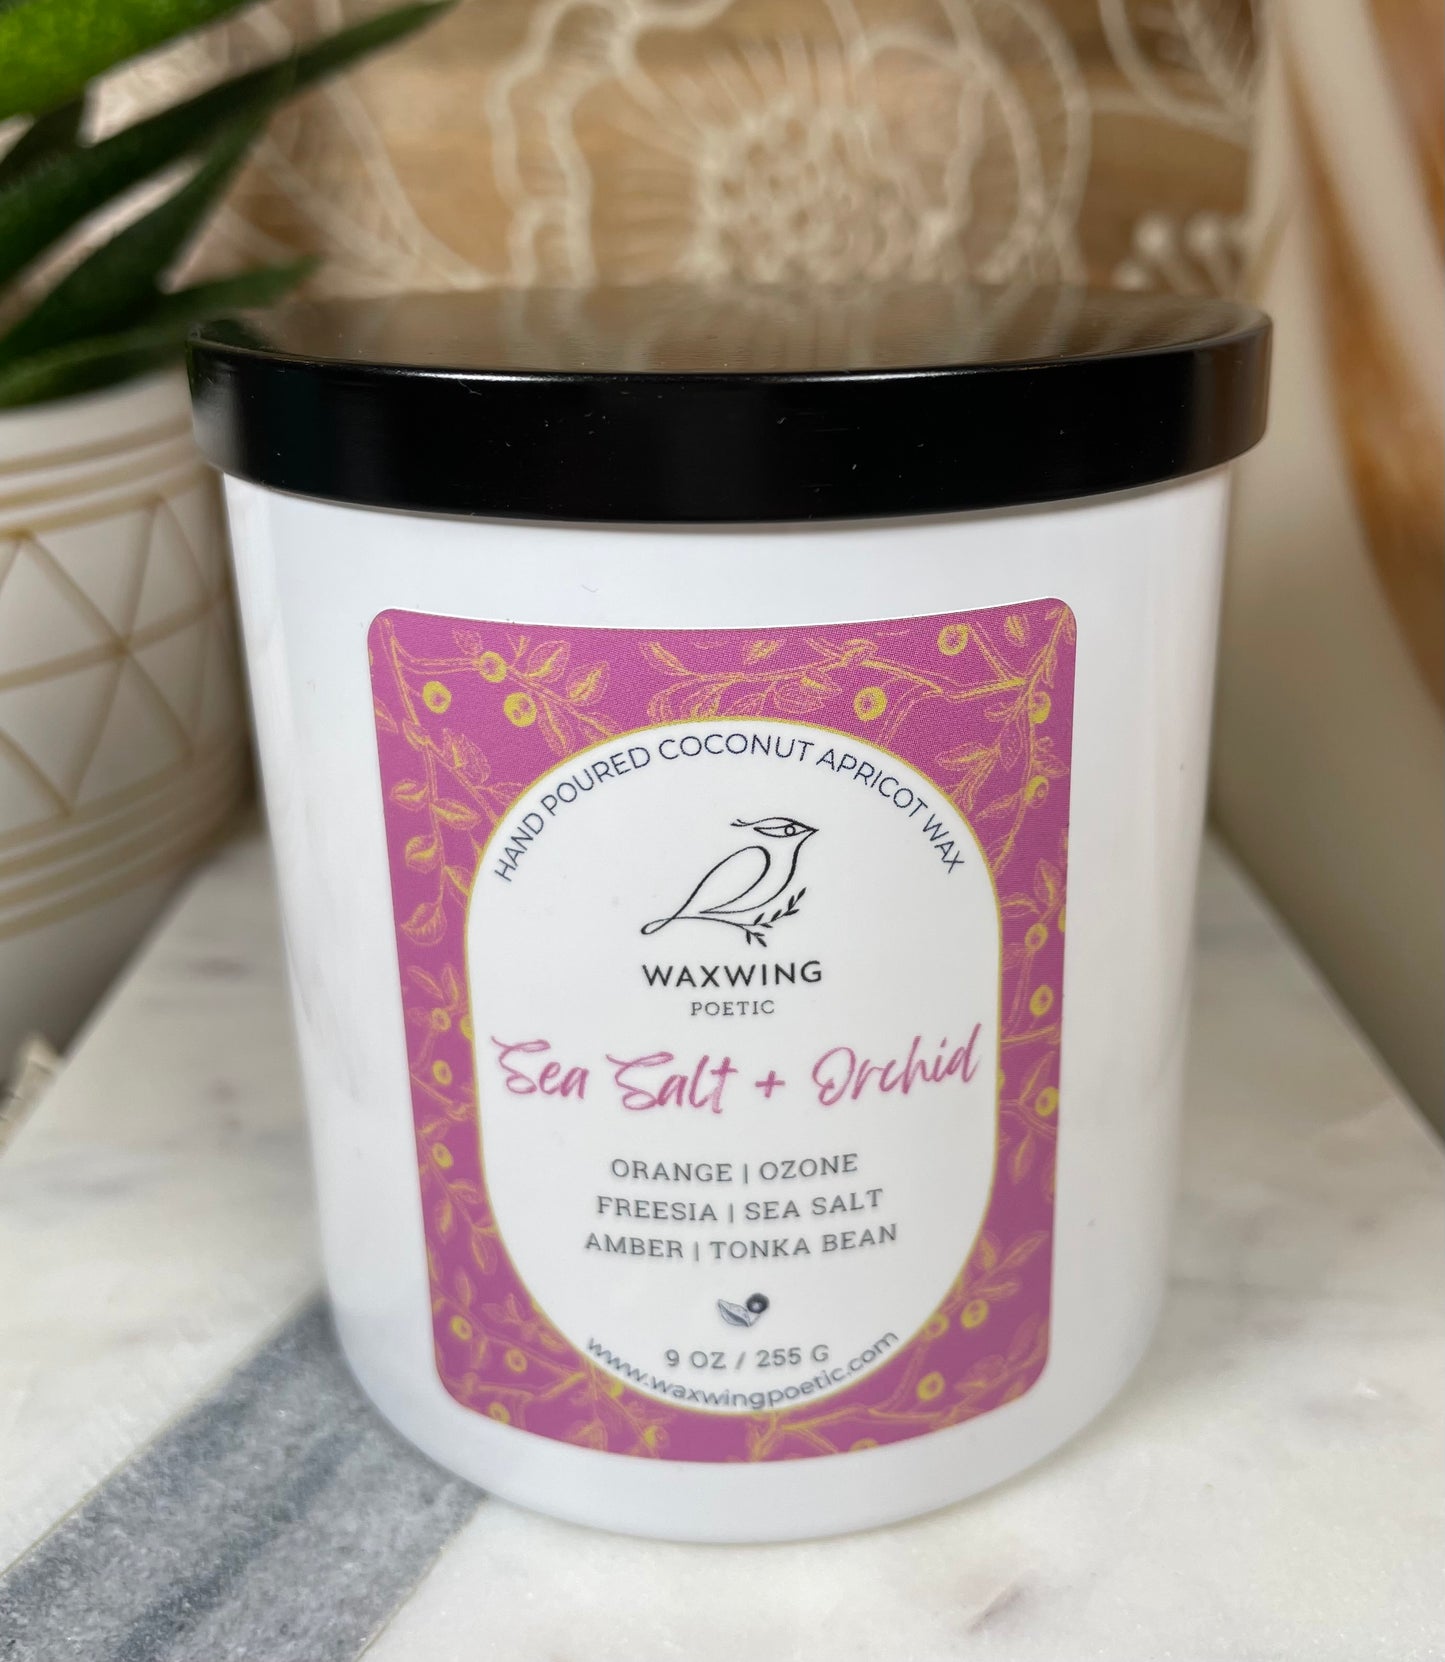 Sea Salt + Orchid | Coconut Apricot Wax Candle